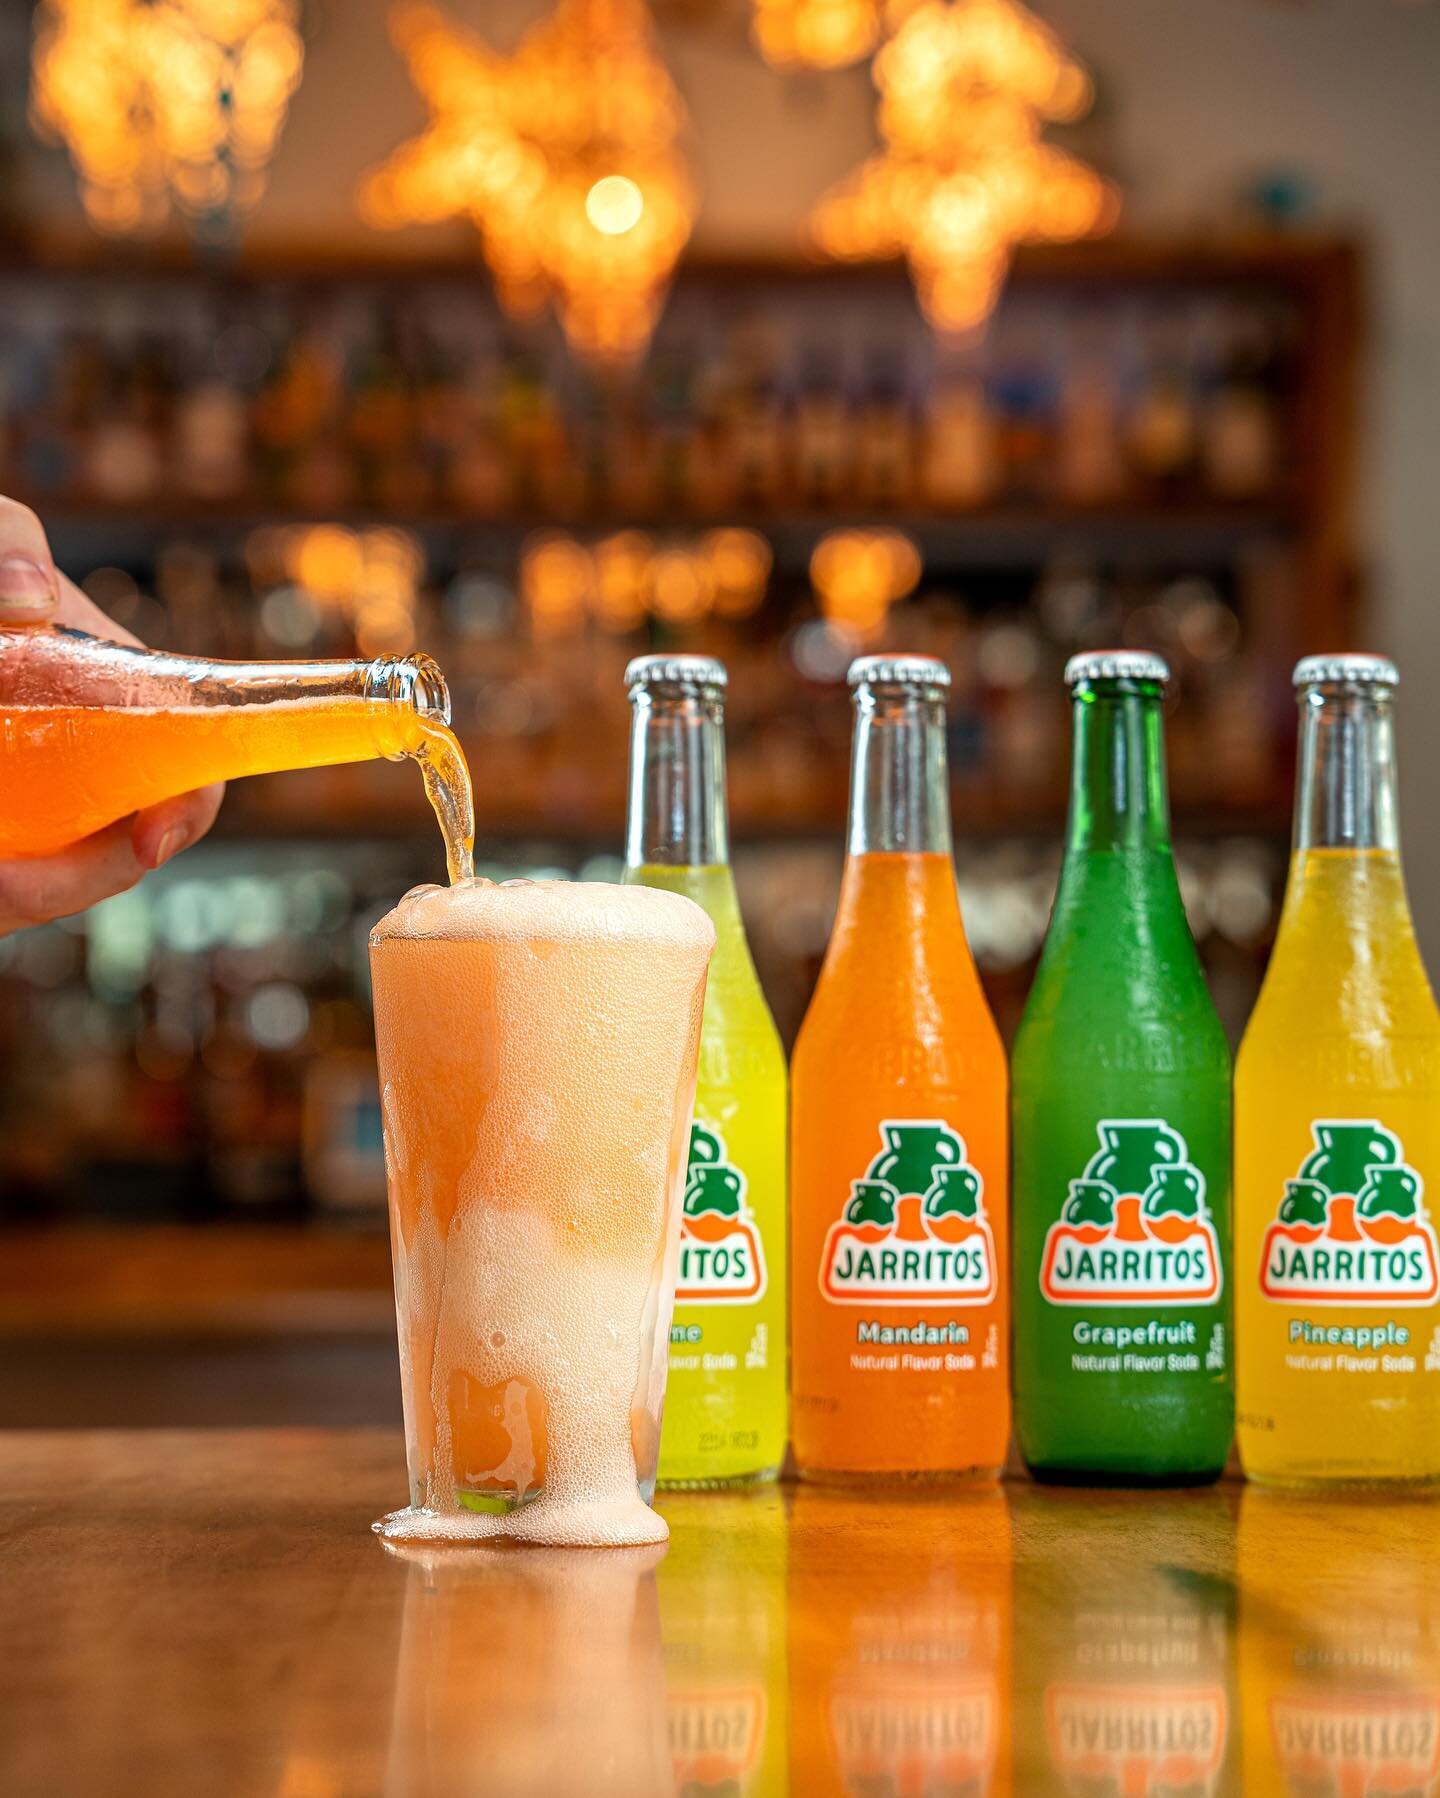 The Jarritos Float. Ice cream + jarritos. Doesn&rsquo;t get any better than that!

It feels like summer is already here, this perfect dessert for the warm days ahead.